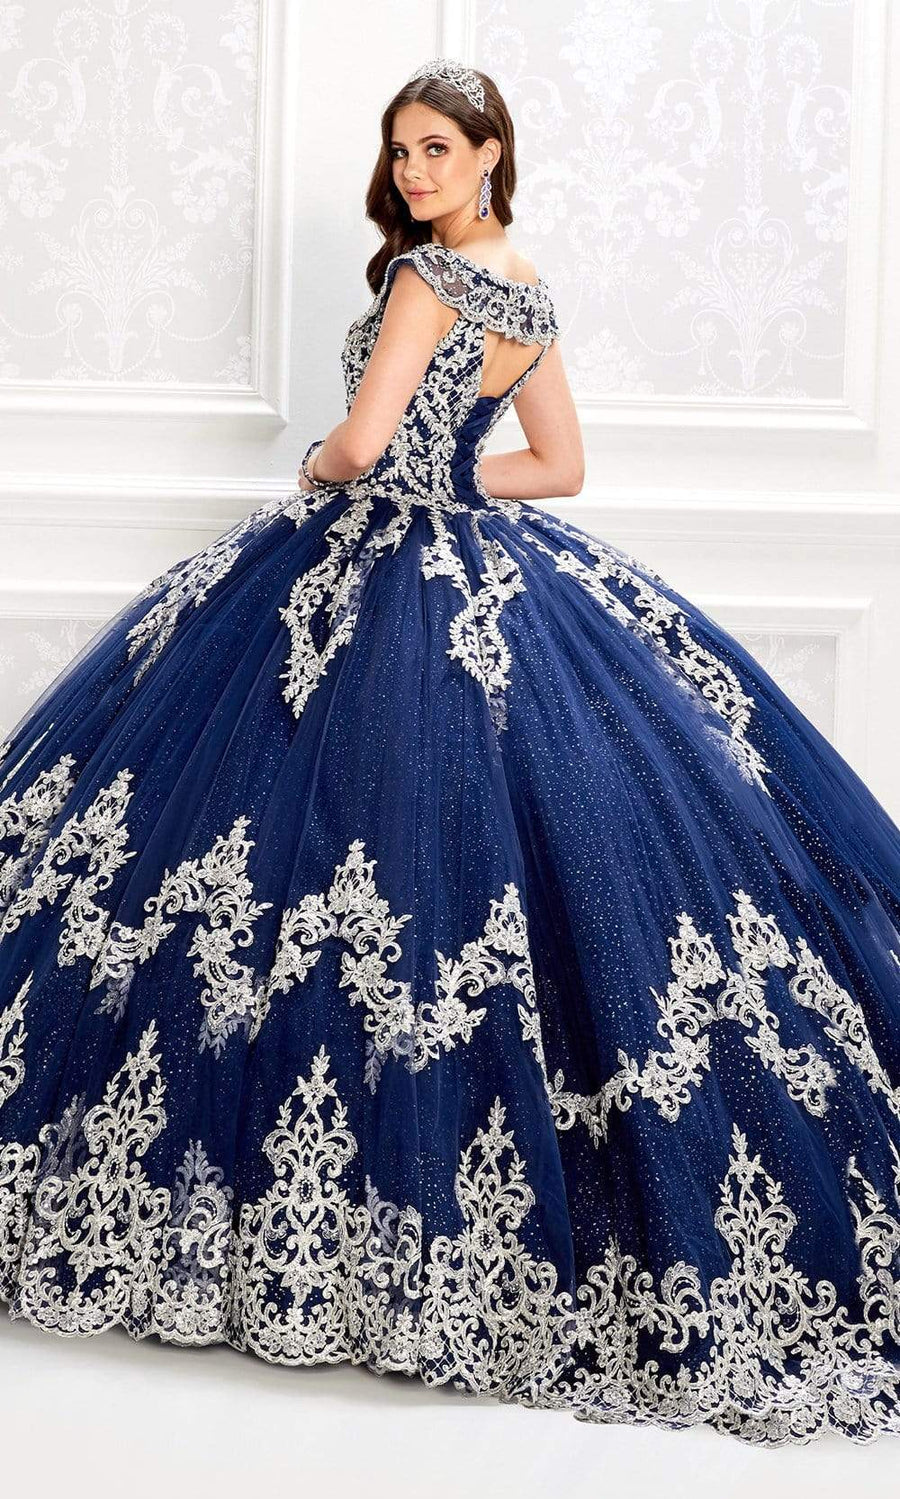 Quinceanera Dresses - Cute & Elegant Quince Dresses - Couture Candy